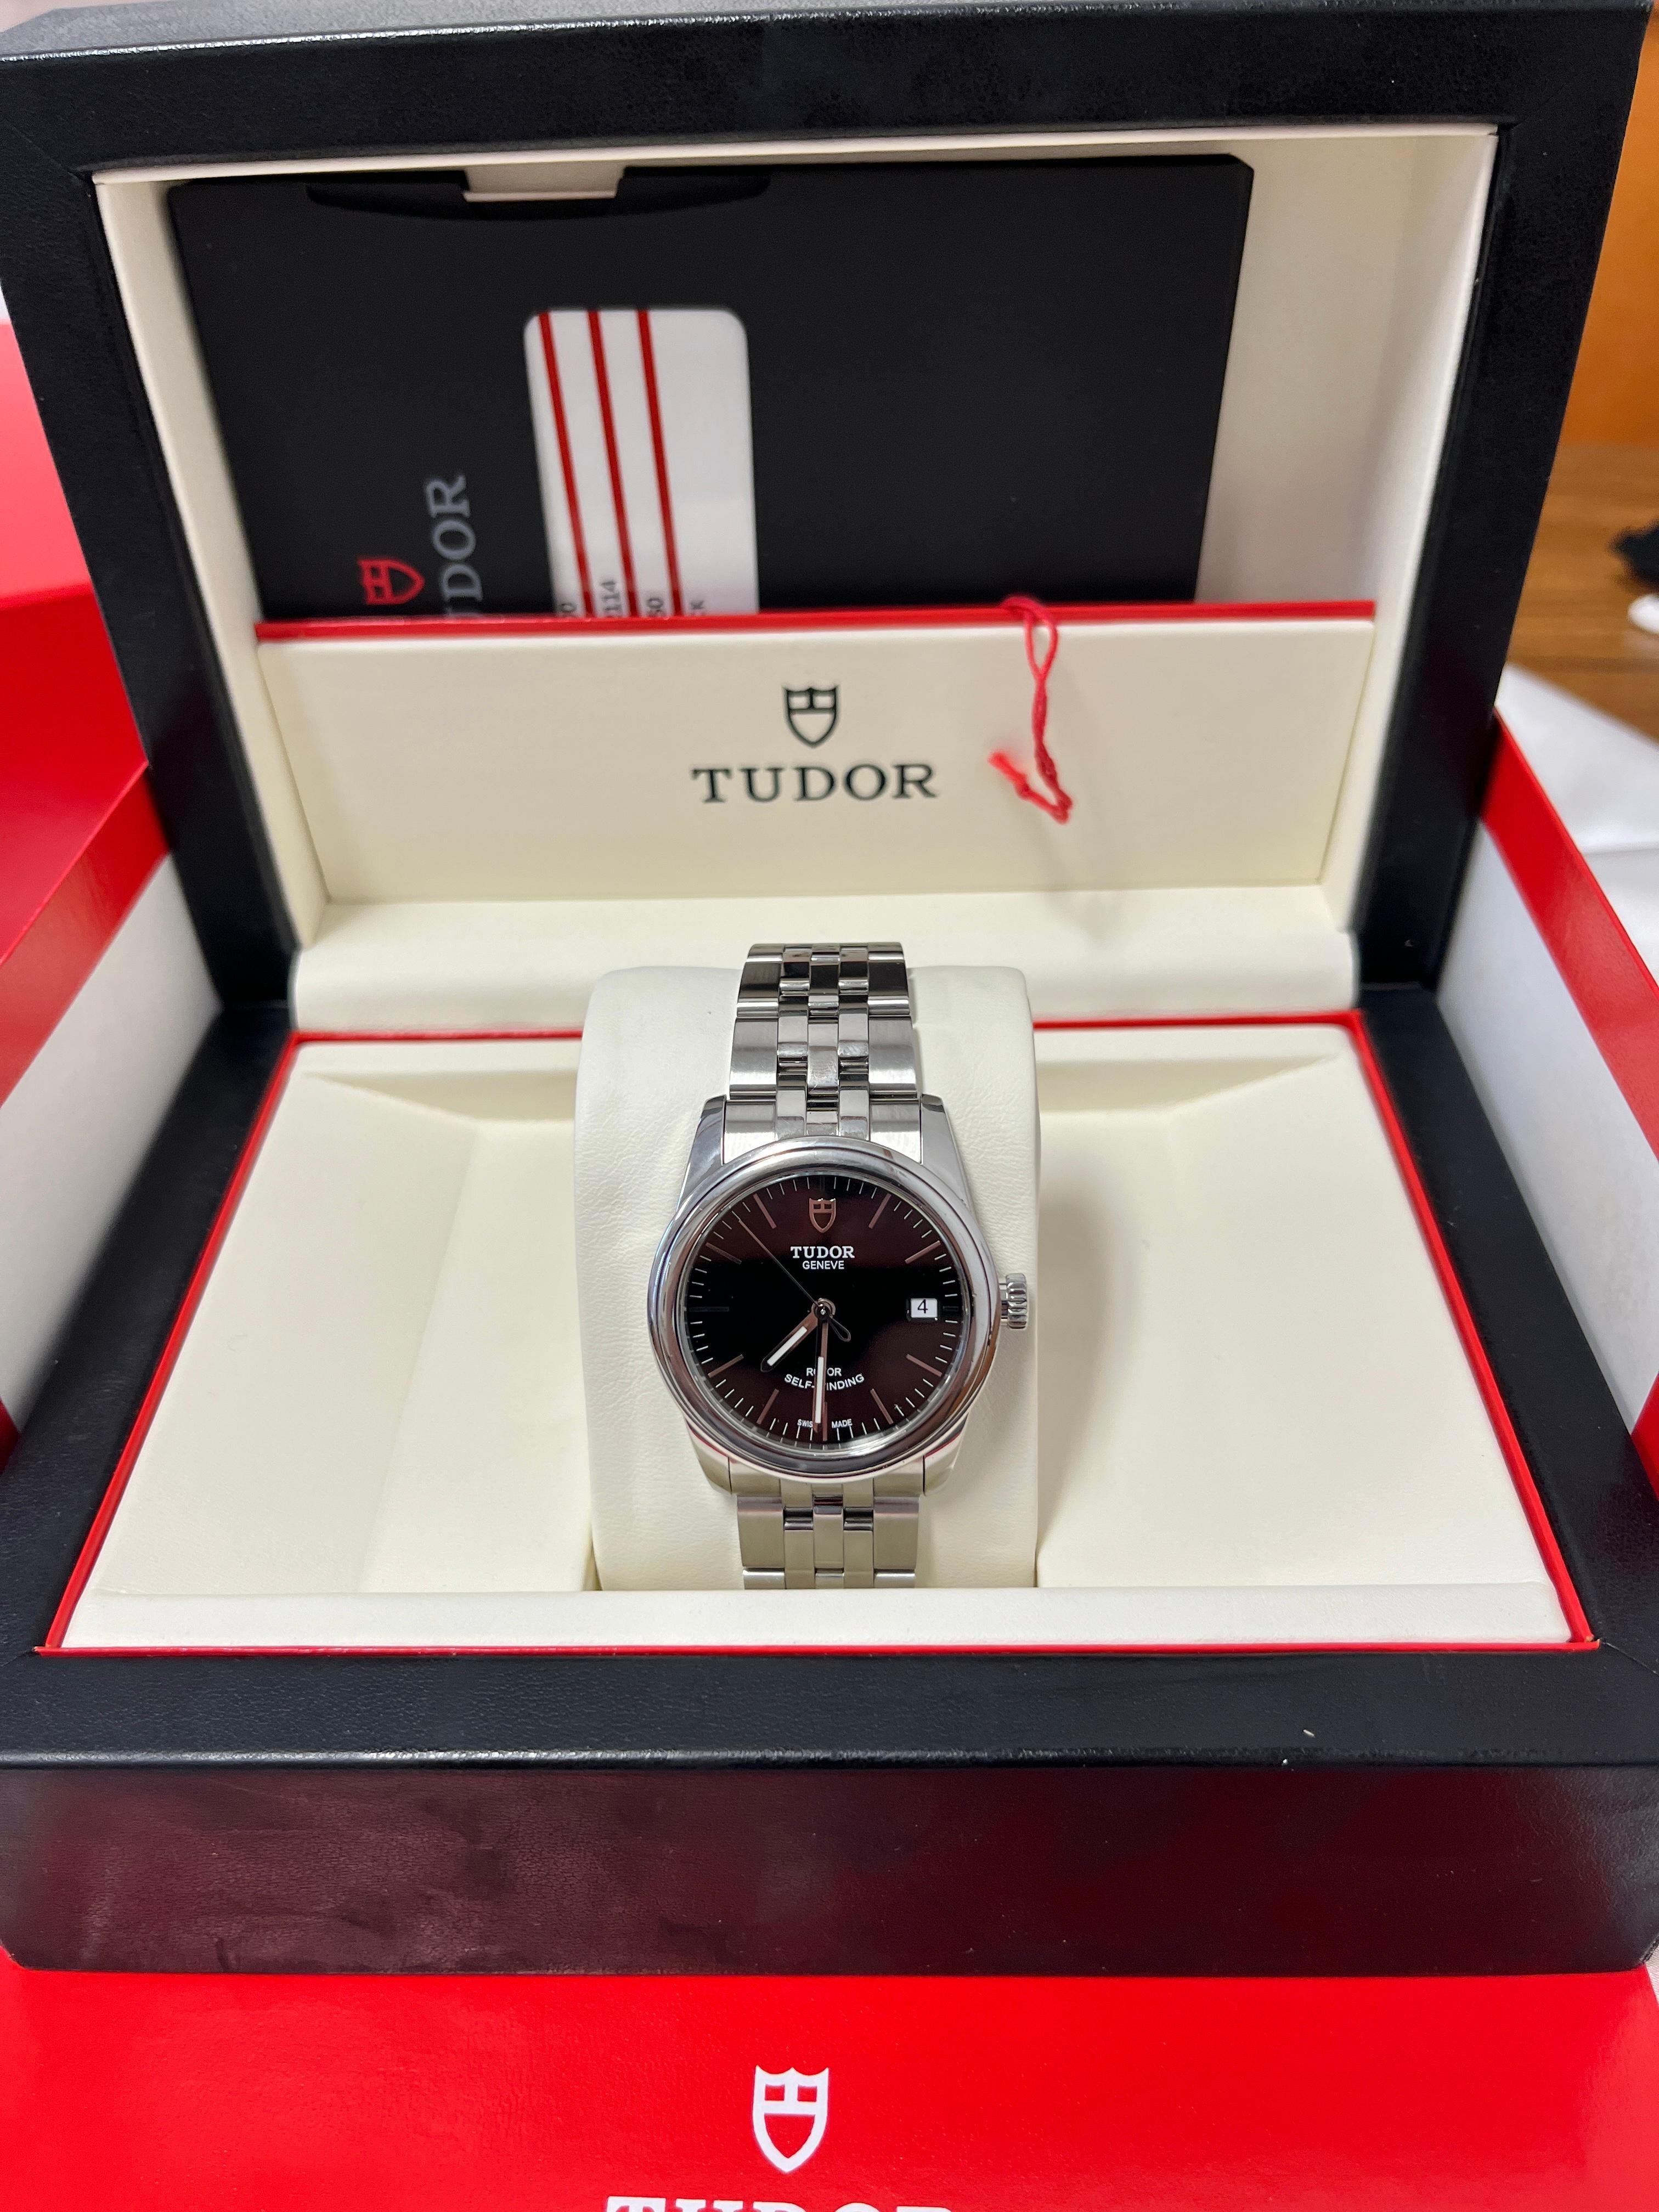 Tudor Glamour Date 55000 with all original parts, box, card, pamphlet papers, tags, and fully linked. A full set. 

36mm stainless steel men's timepiece boasting a captivating black dial, smooth double bezel, and an integrated bracelet that hugs the